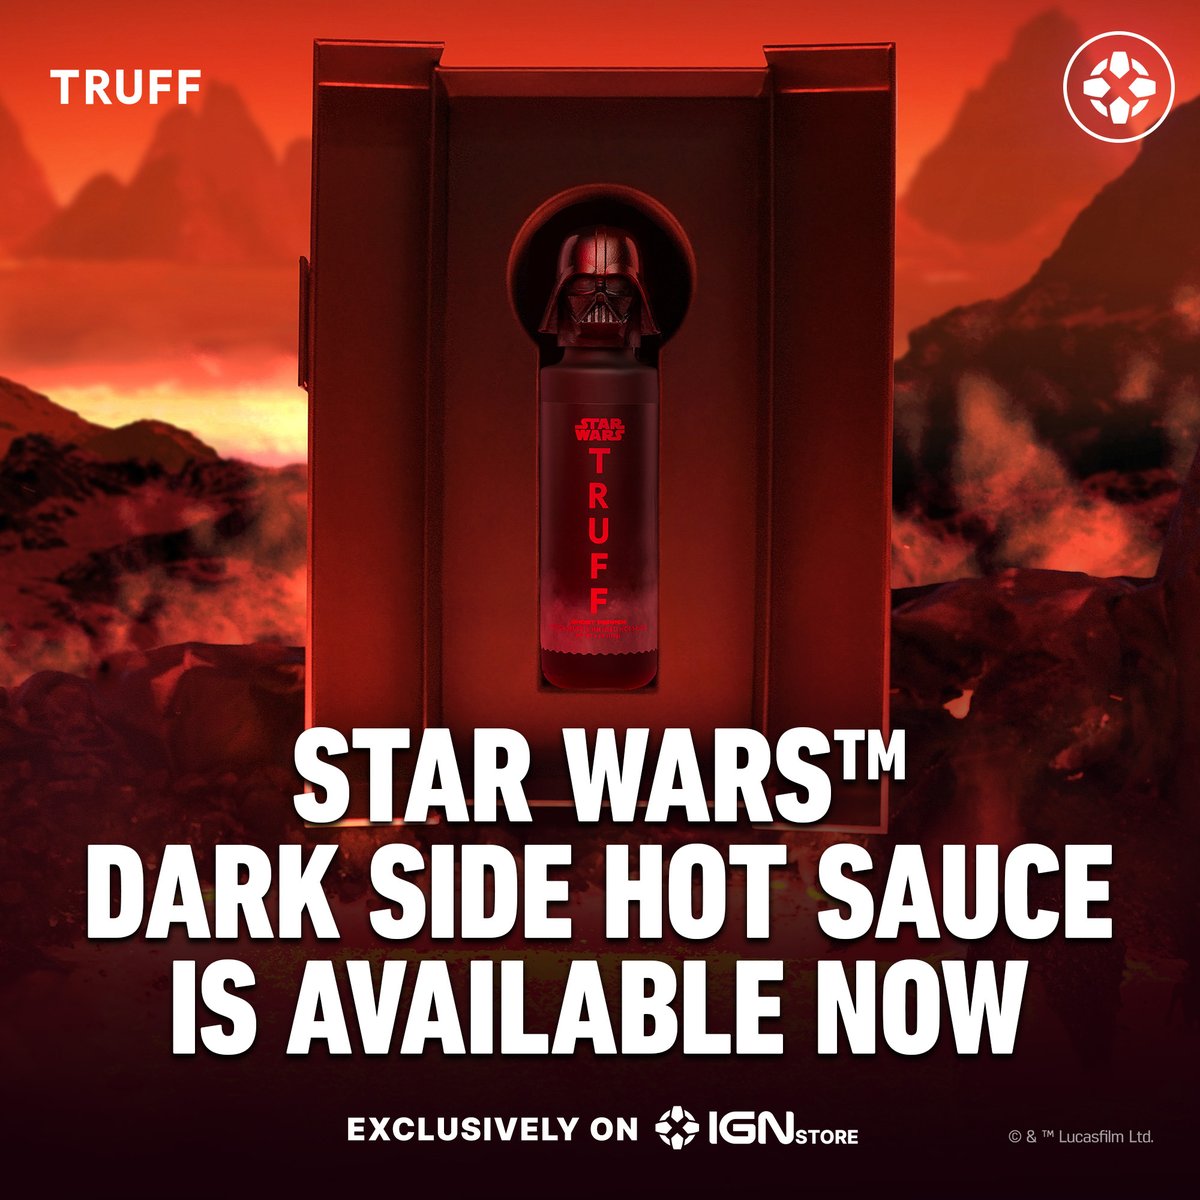 STAR WARS Dark Side Hot Sauce is a carefully crafted blend inspired by the ominous allure and dark mystique of the @STARWARS galaxy. Order now exclusively on IGN Store! ign.com/TRUFF